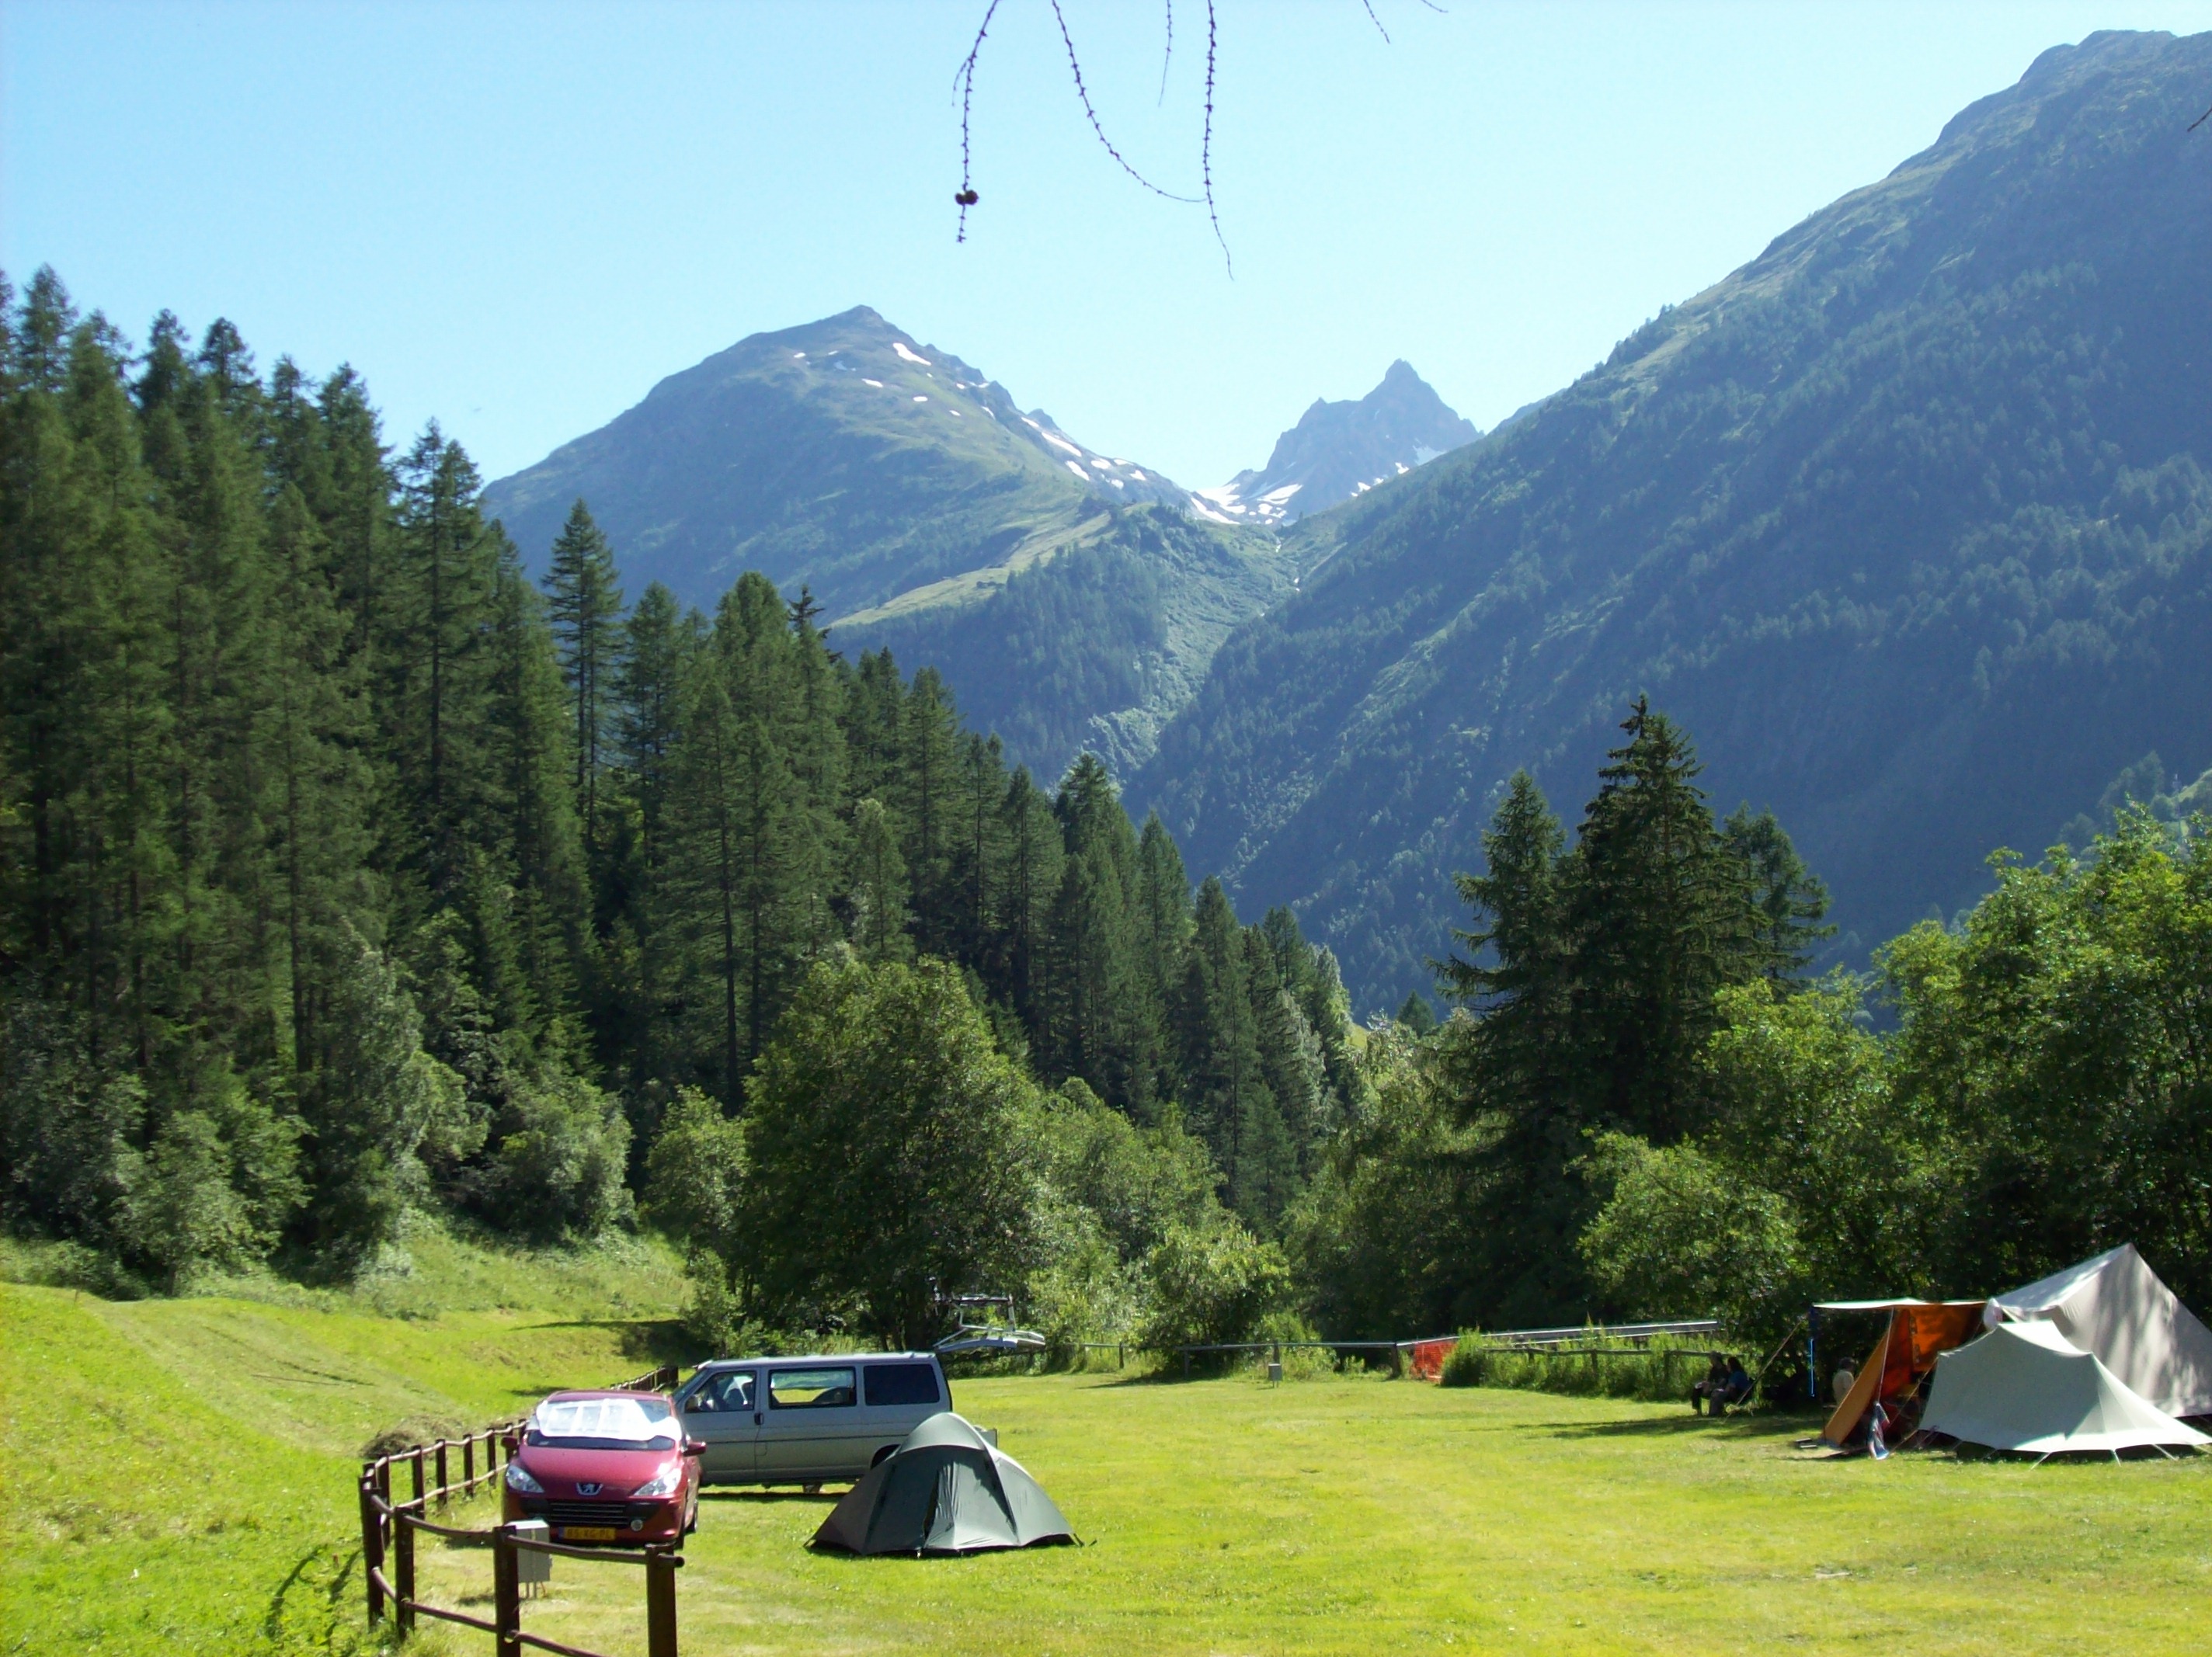 File:Camping ground in Kippel.jpg - Wikimedia Commons